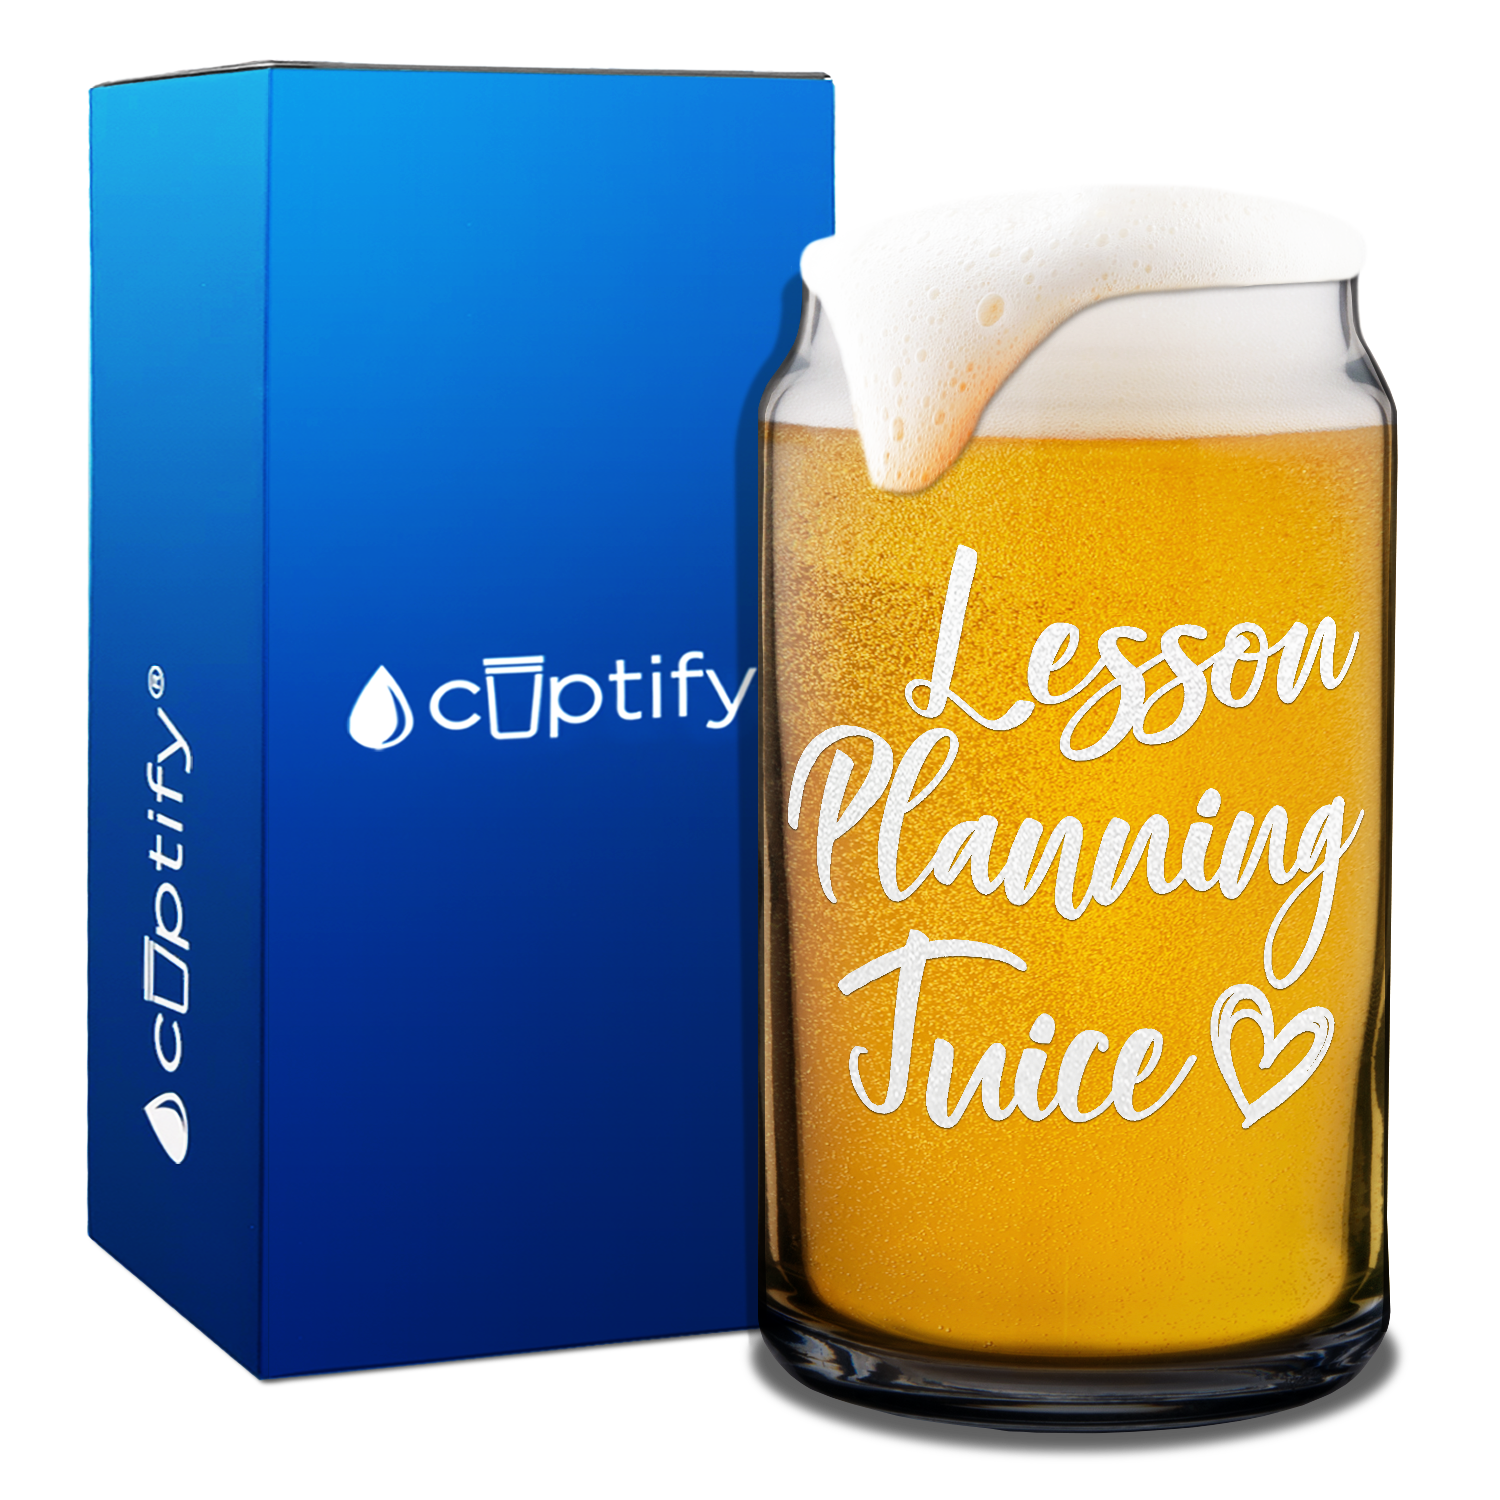 Lesson Planning Juice on 16oz Beer Can Glass